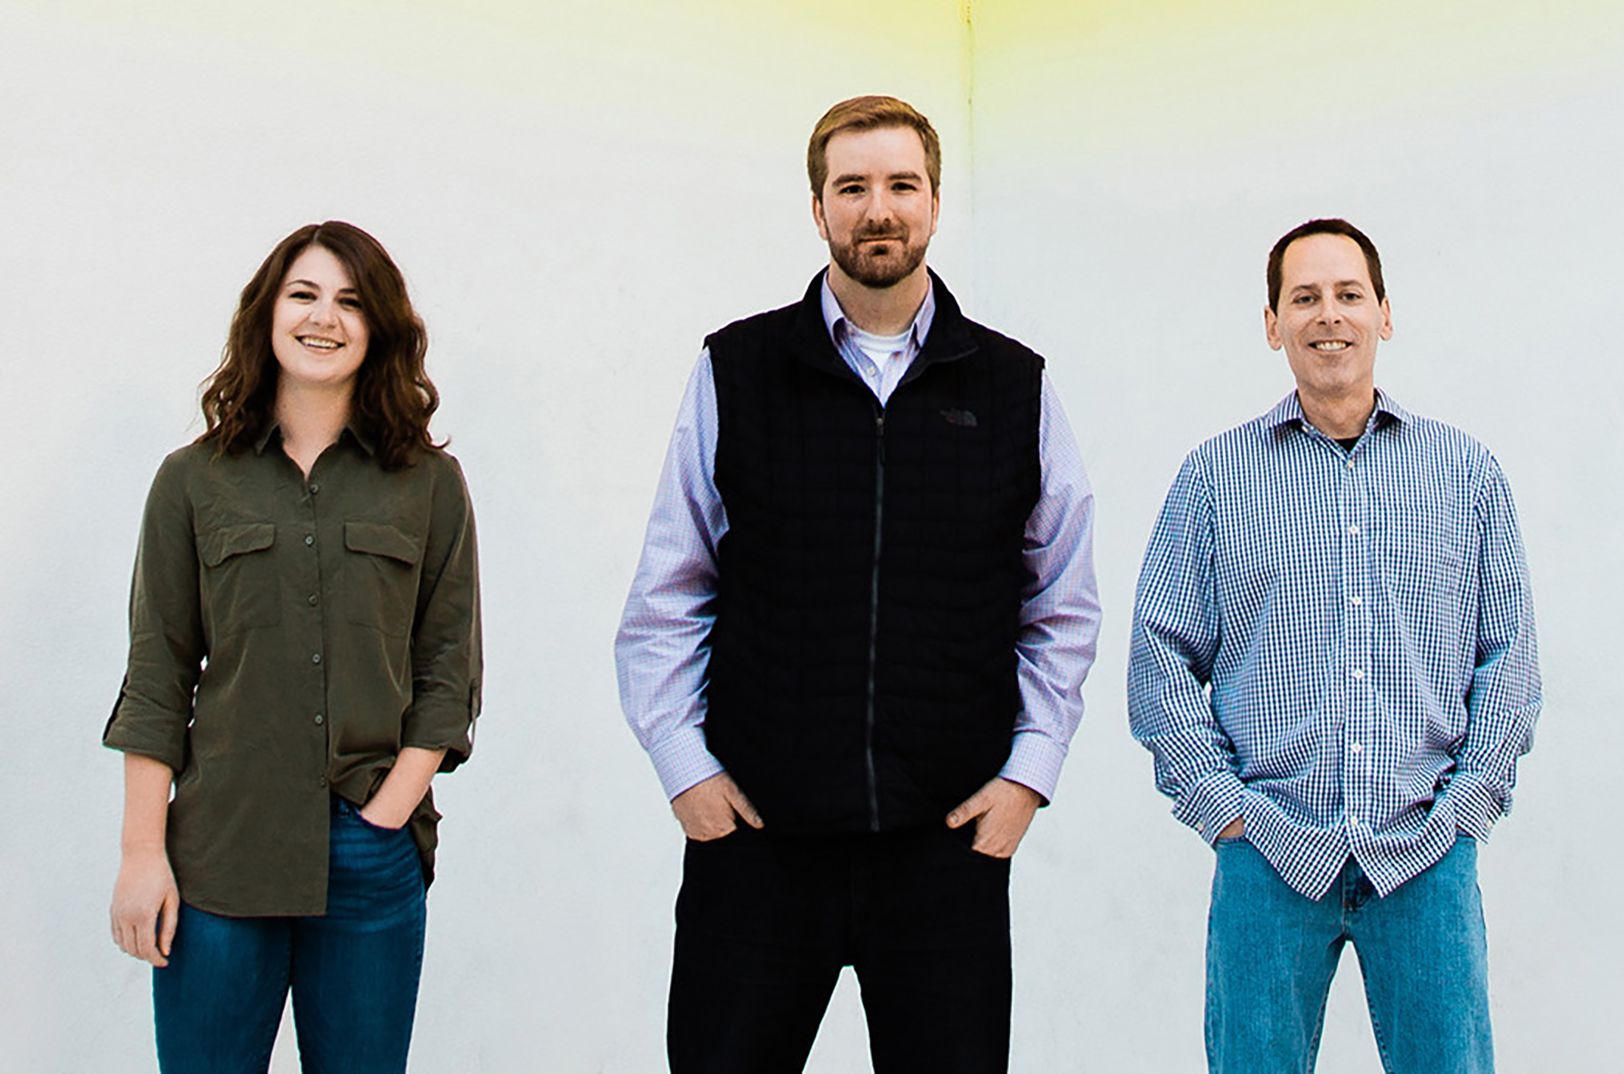 With new partner, Firebrand ramps up 'founder-focused' culture, aims to double fund